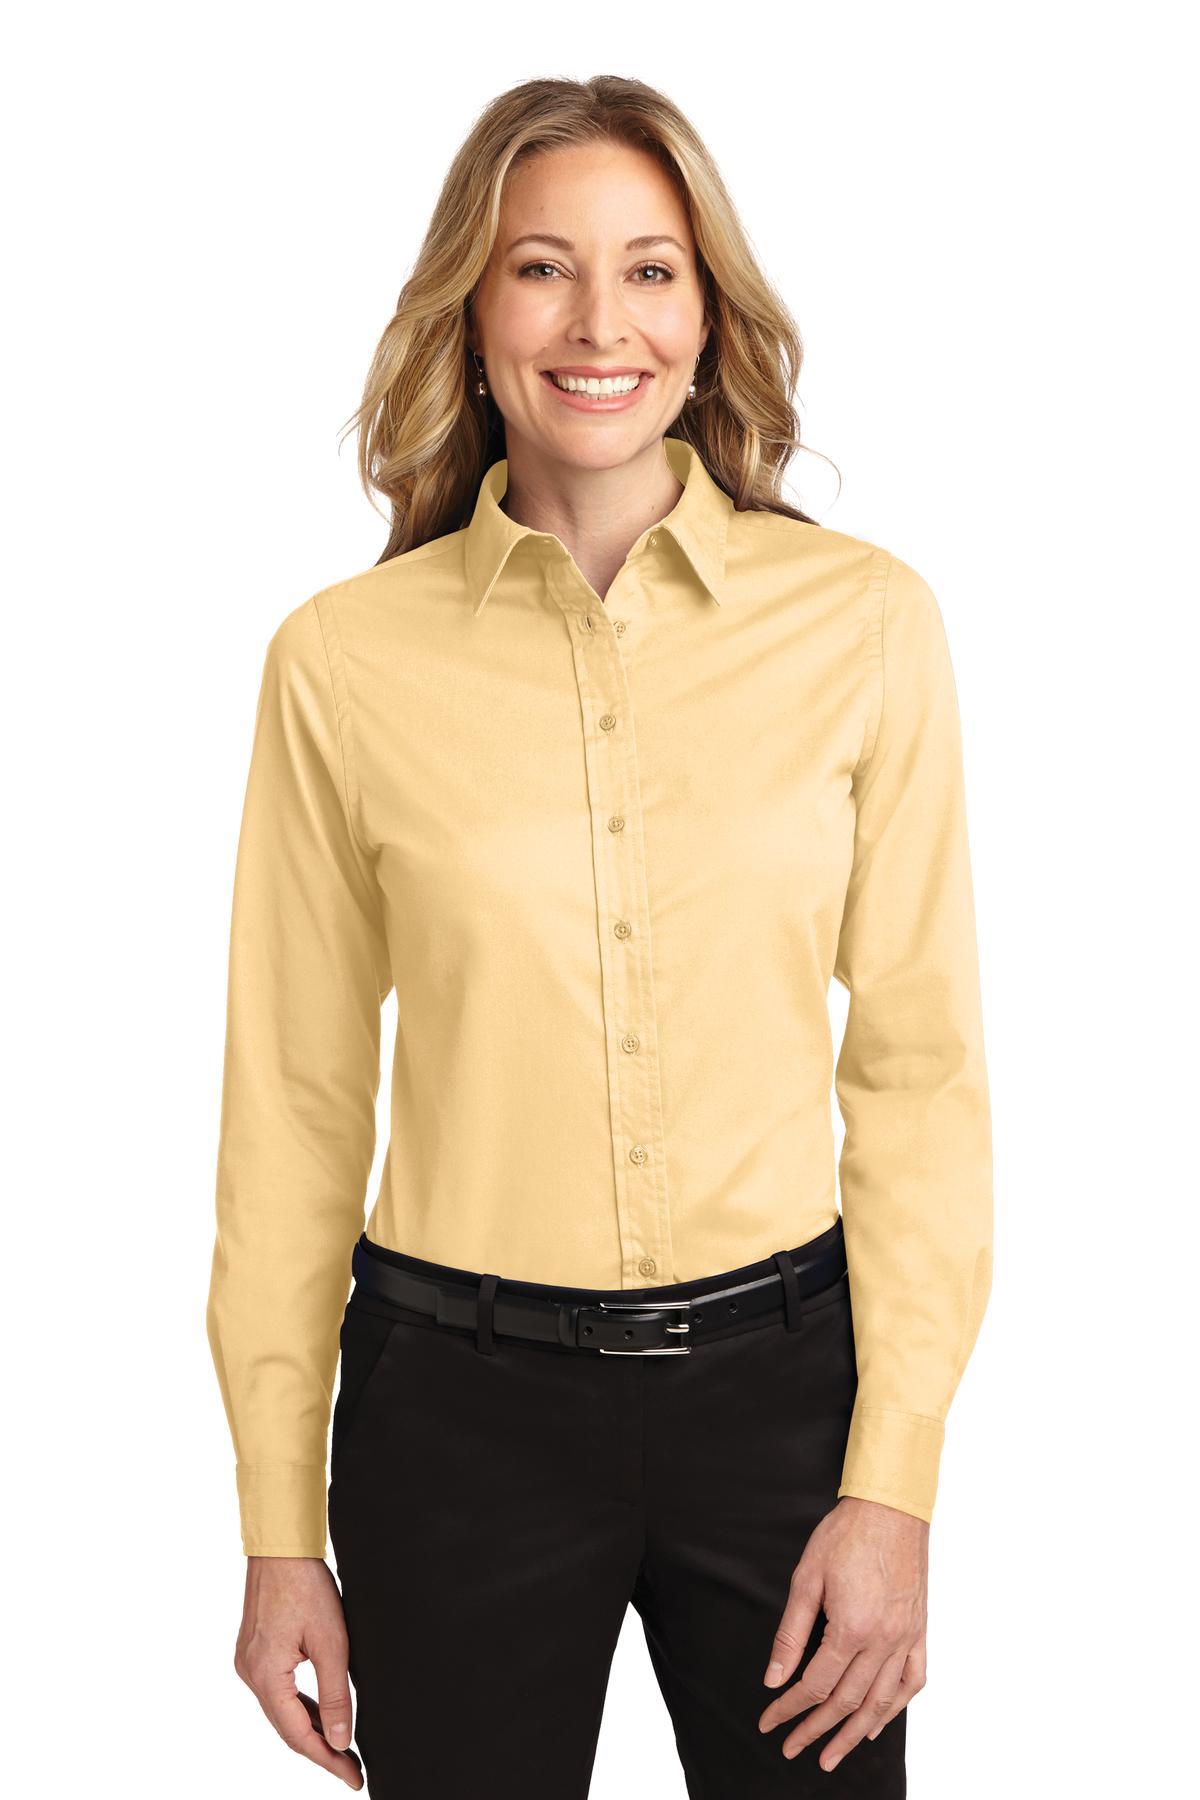 Port Authority Women's Long Sleeve Easy Care Shirt - L608 - image 1 of 1